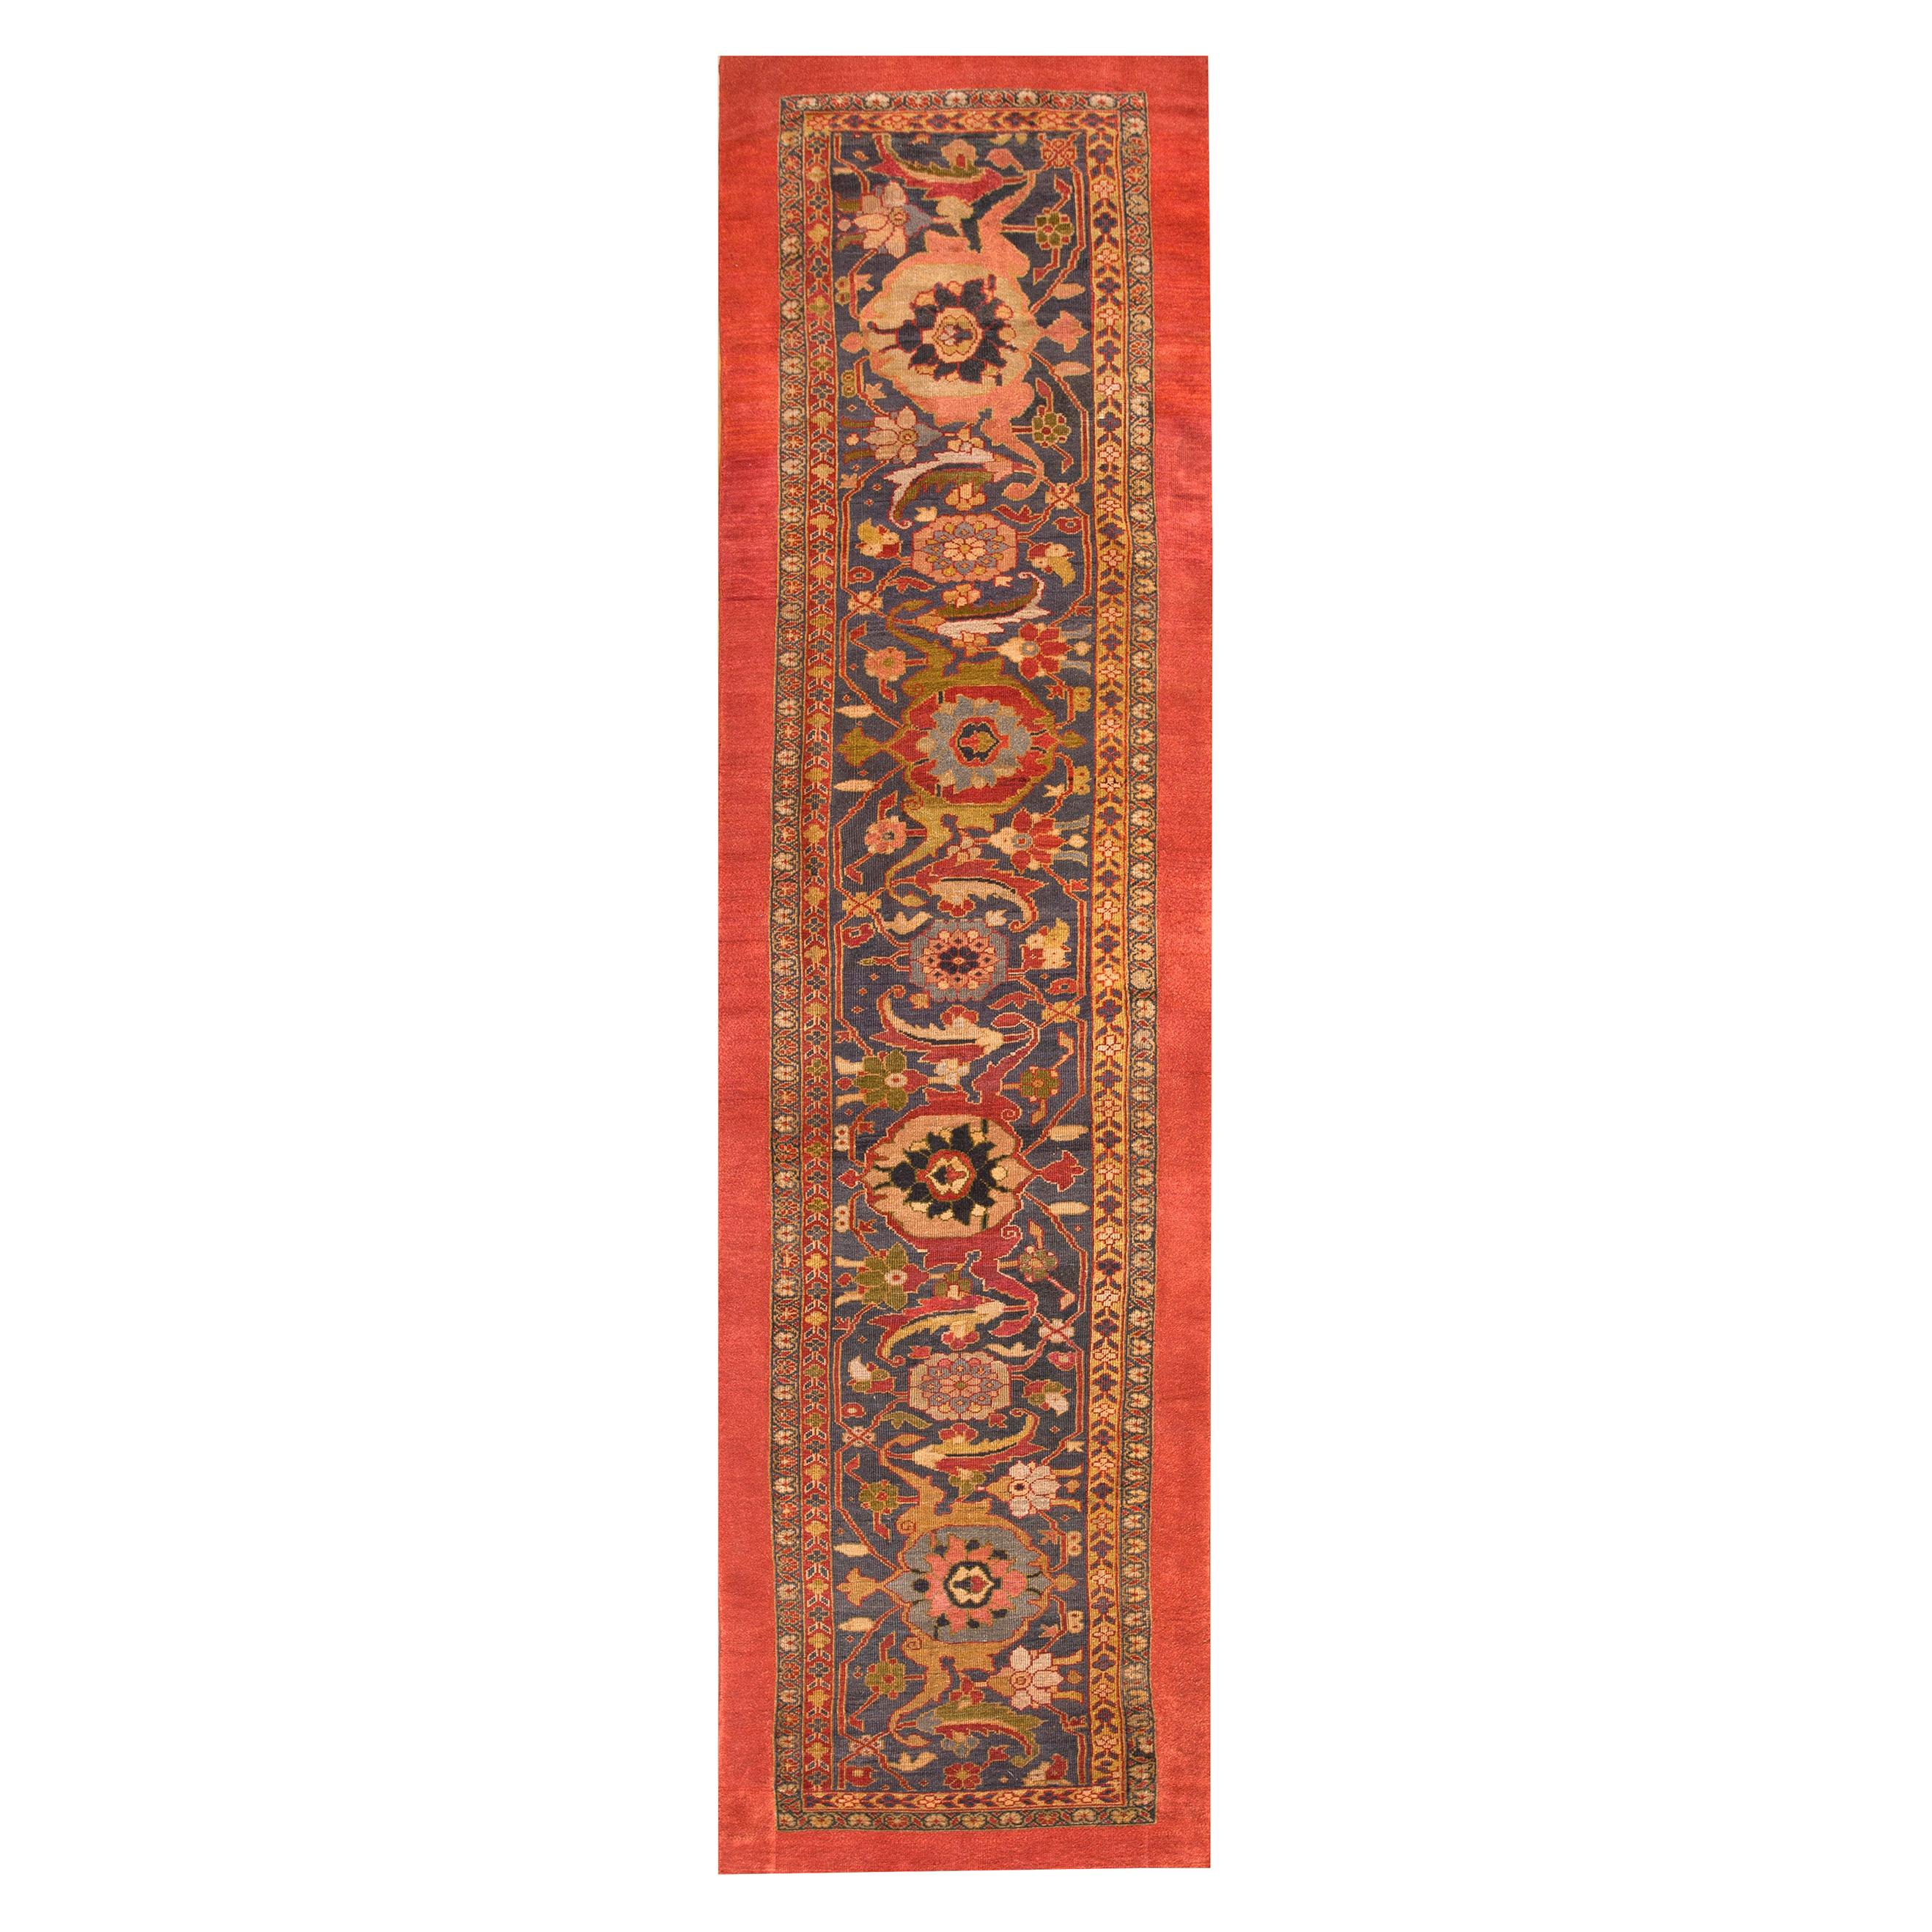 19th Century Persian Sultanabad Carpet ( 3'6" x 13' - 107 x 396 ) For Sale